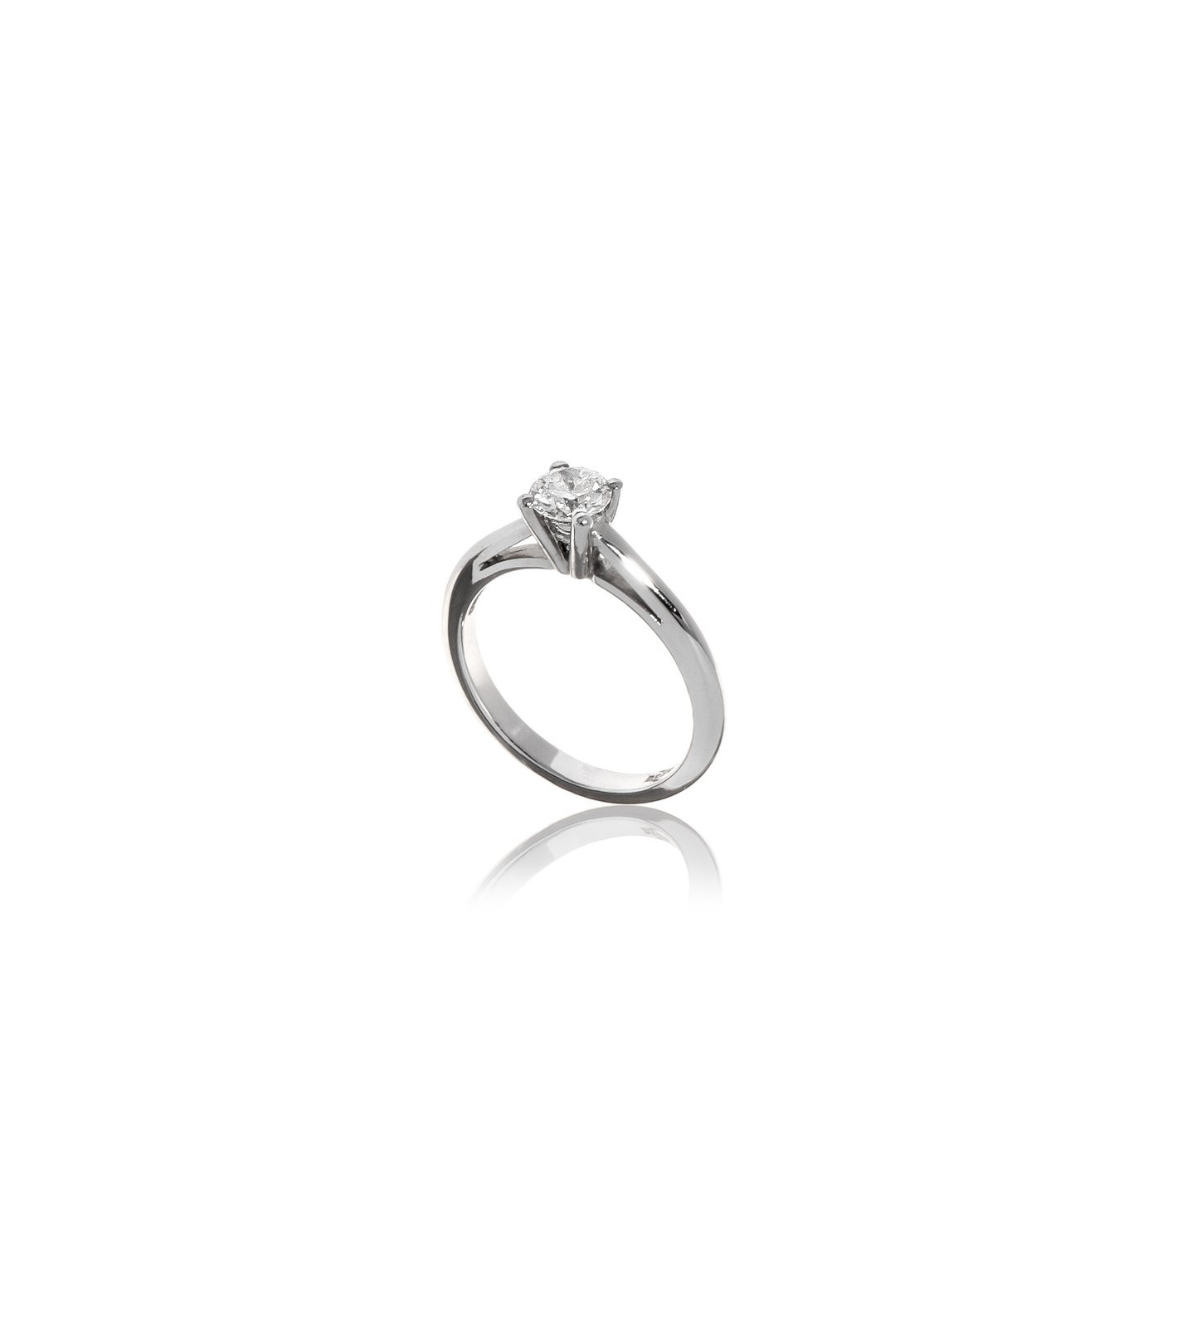 Solitaire White Gold Wedding Ring with Diamonds